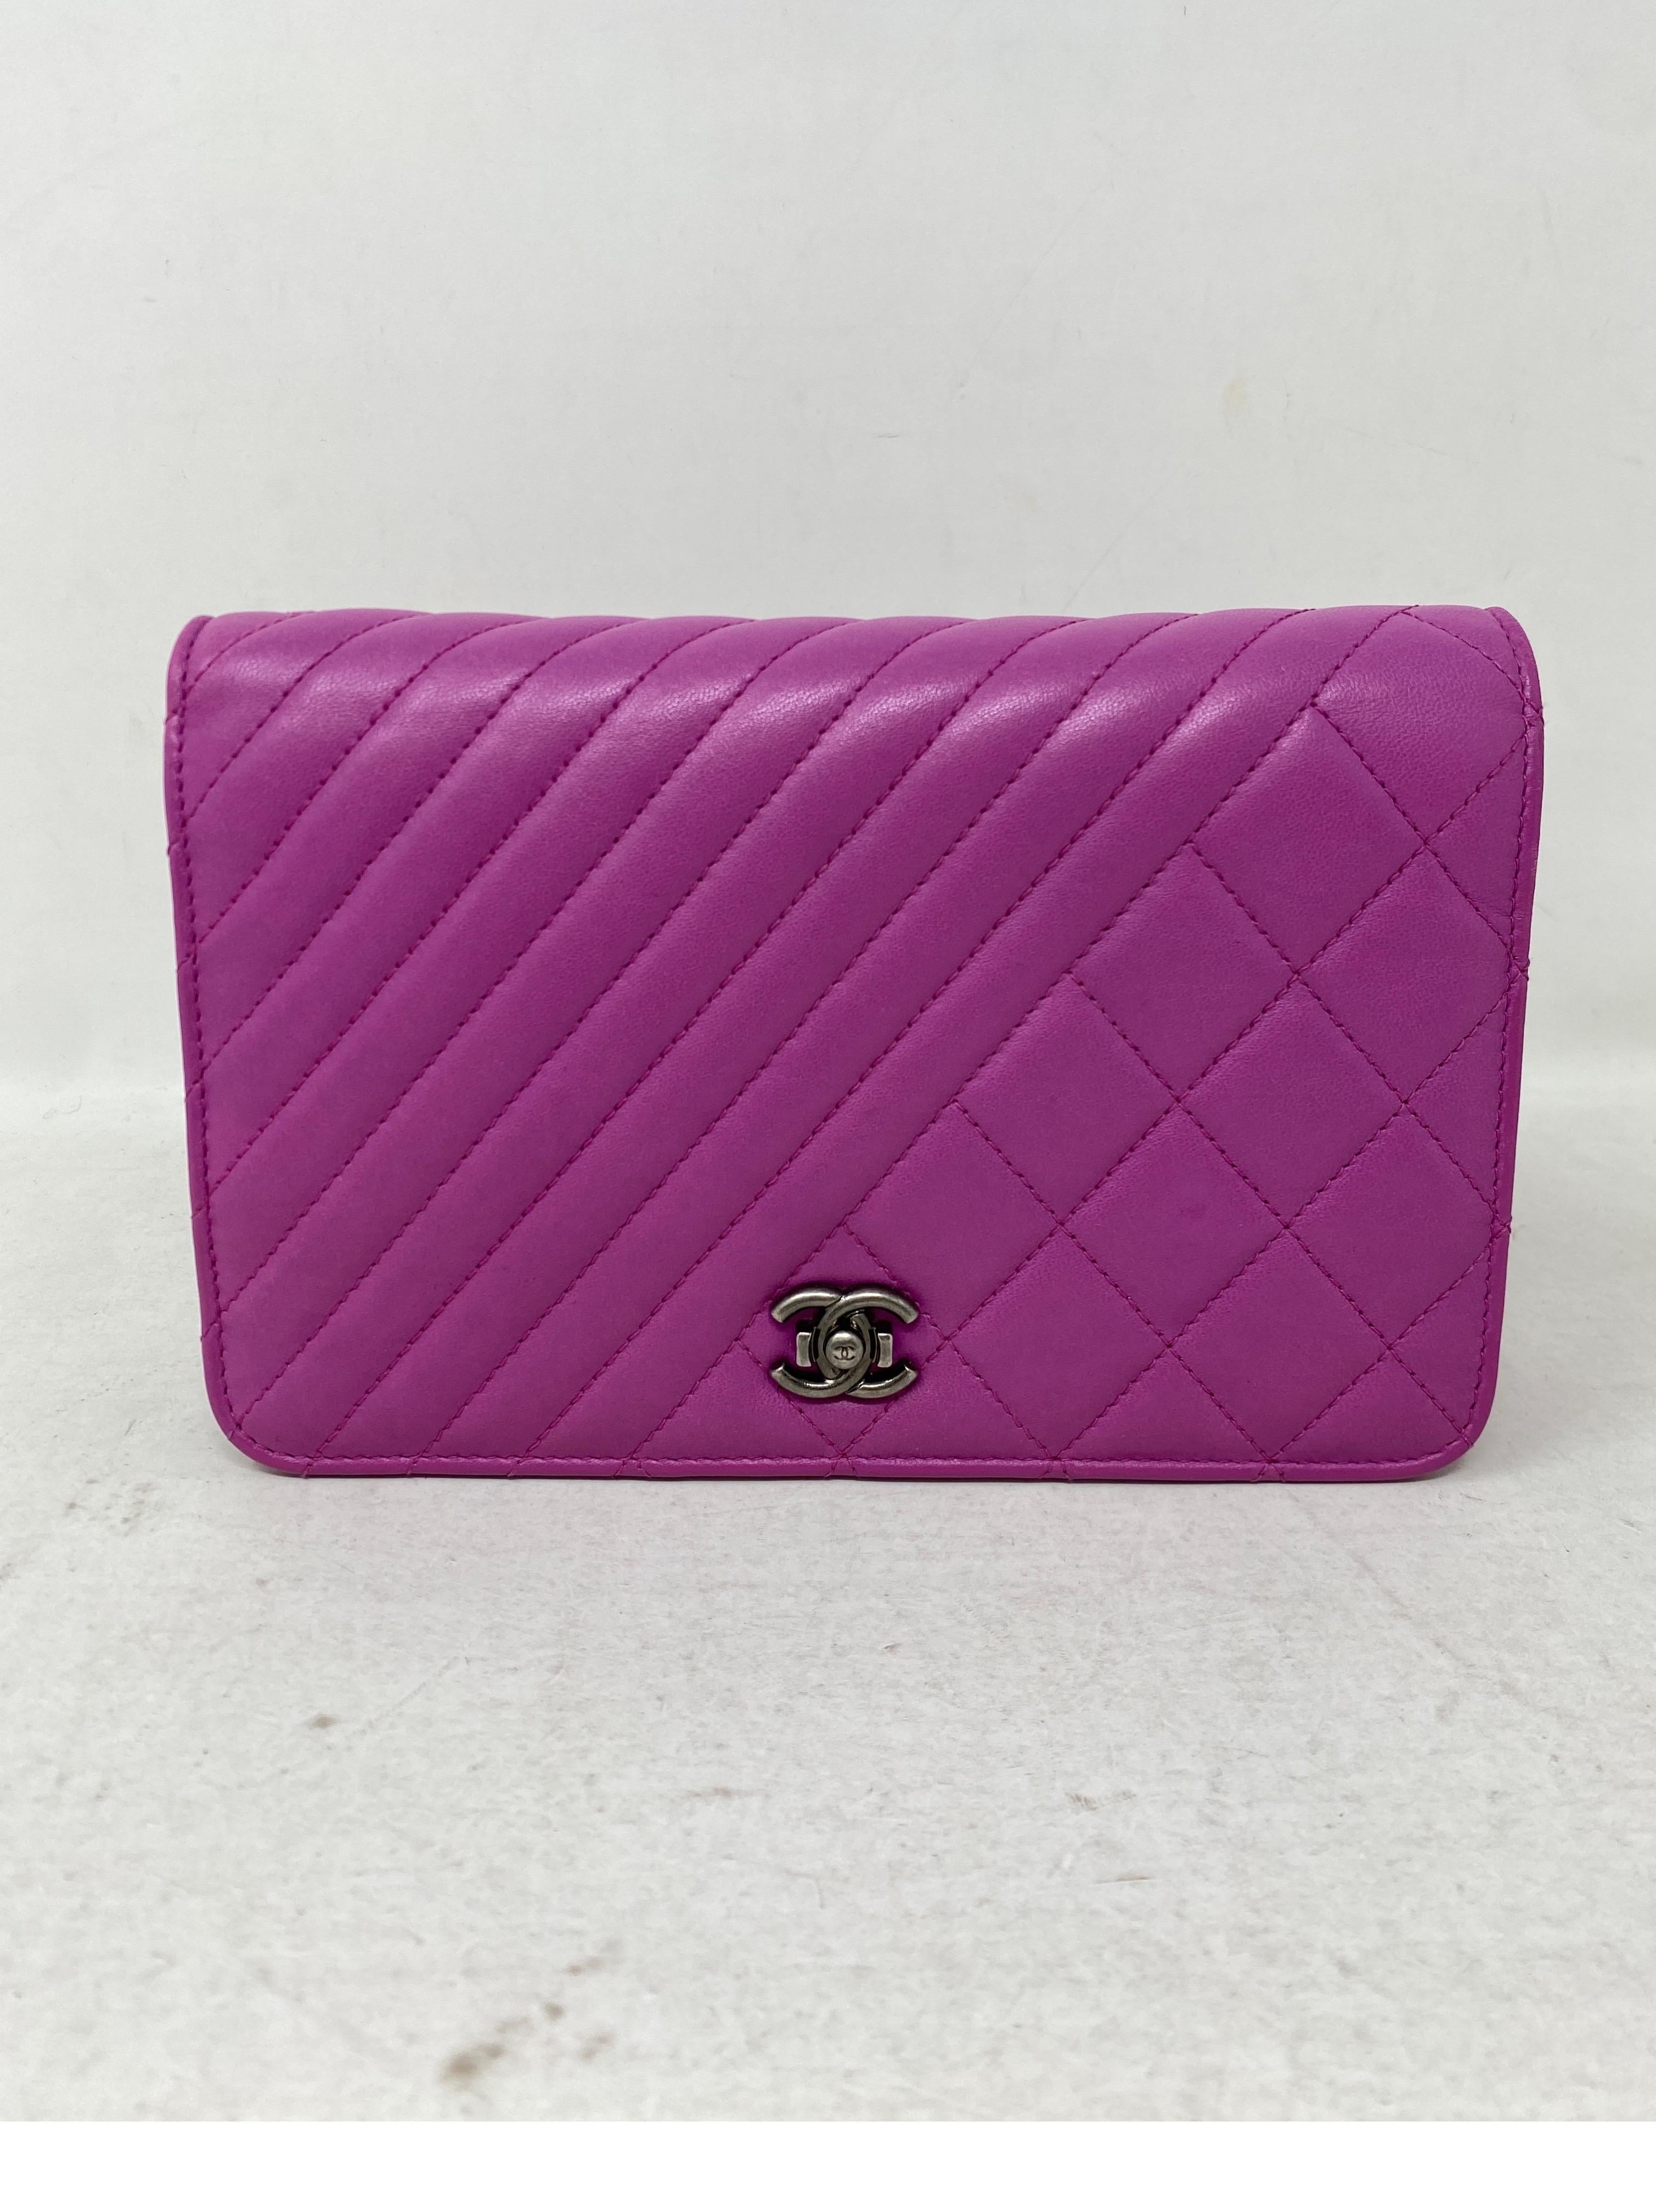 Chanel Fuschia Wallet On A Chain Bag. Unique style wallet on a chain. Can be worn as a clutch too. Crossbody bag. Ruthenium hardware. Excellent condition. Pretty and vibrant color. Serial number intact inside bag. Guaranteed authentic. 